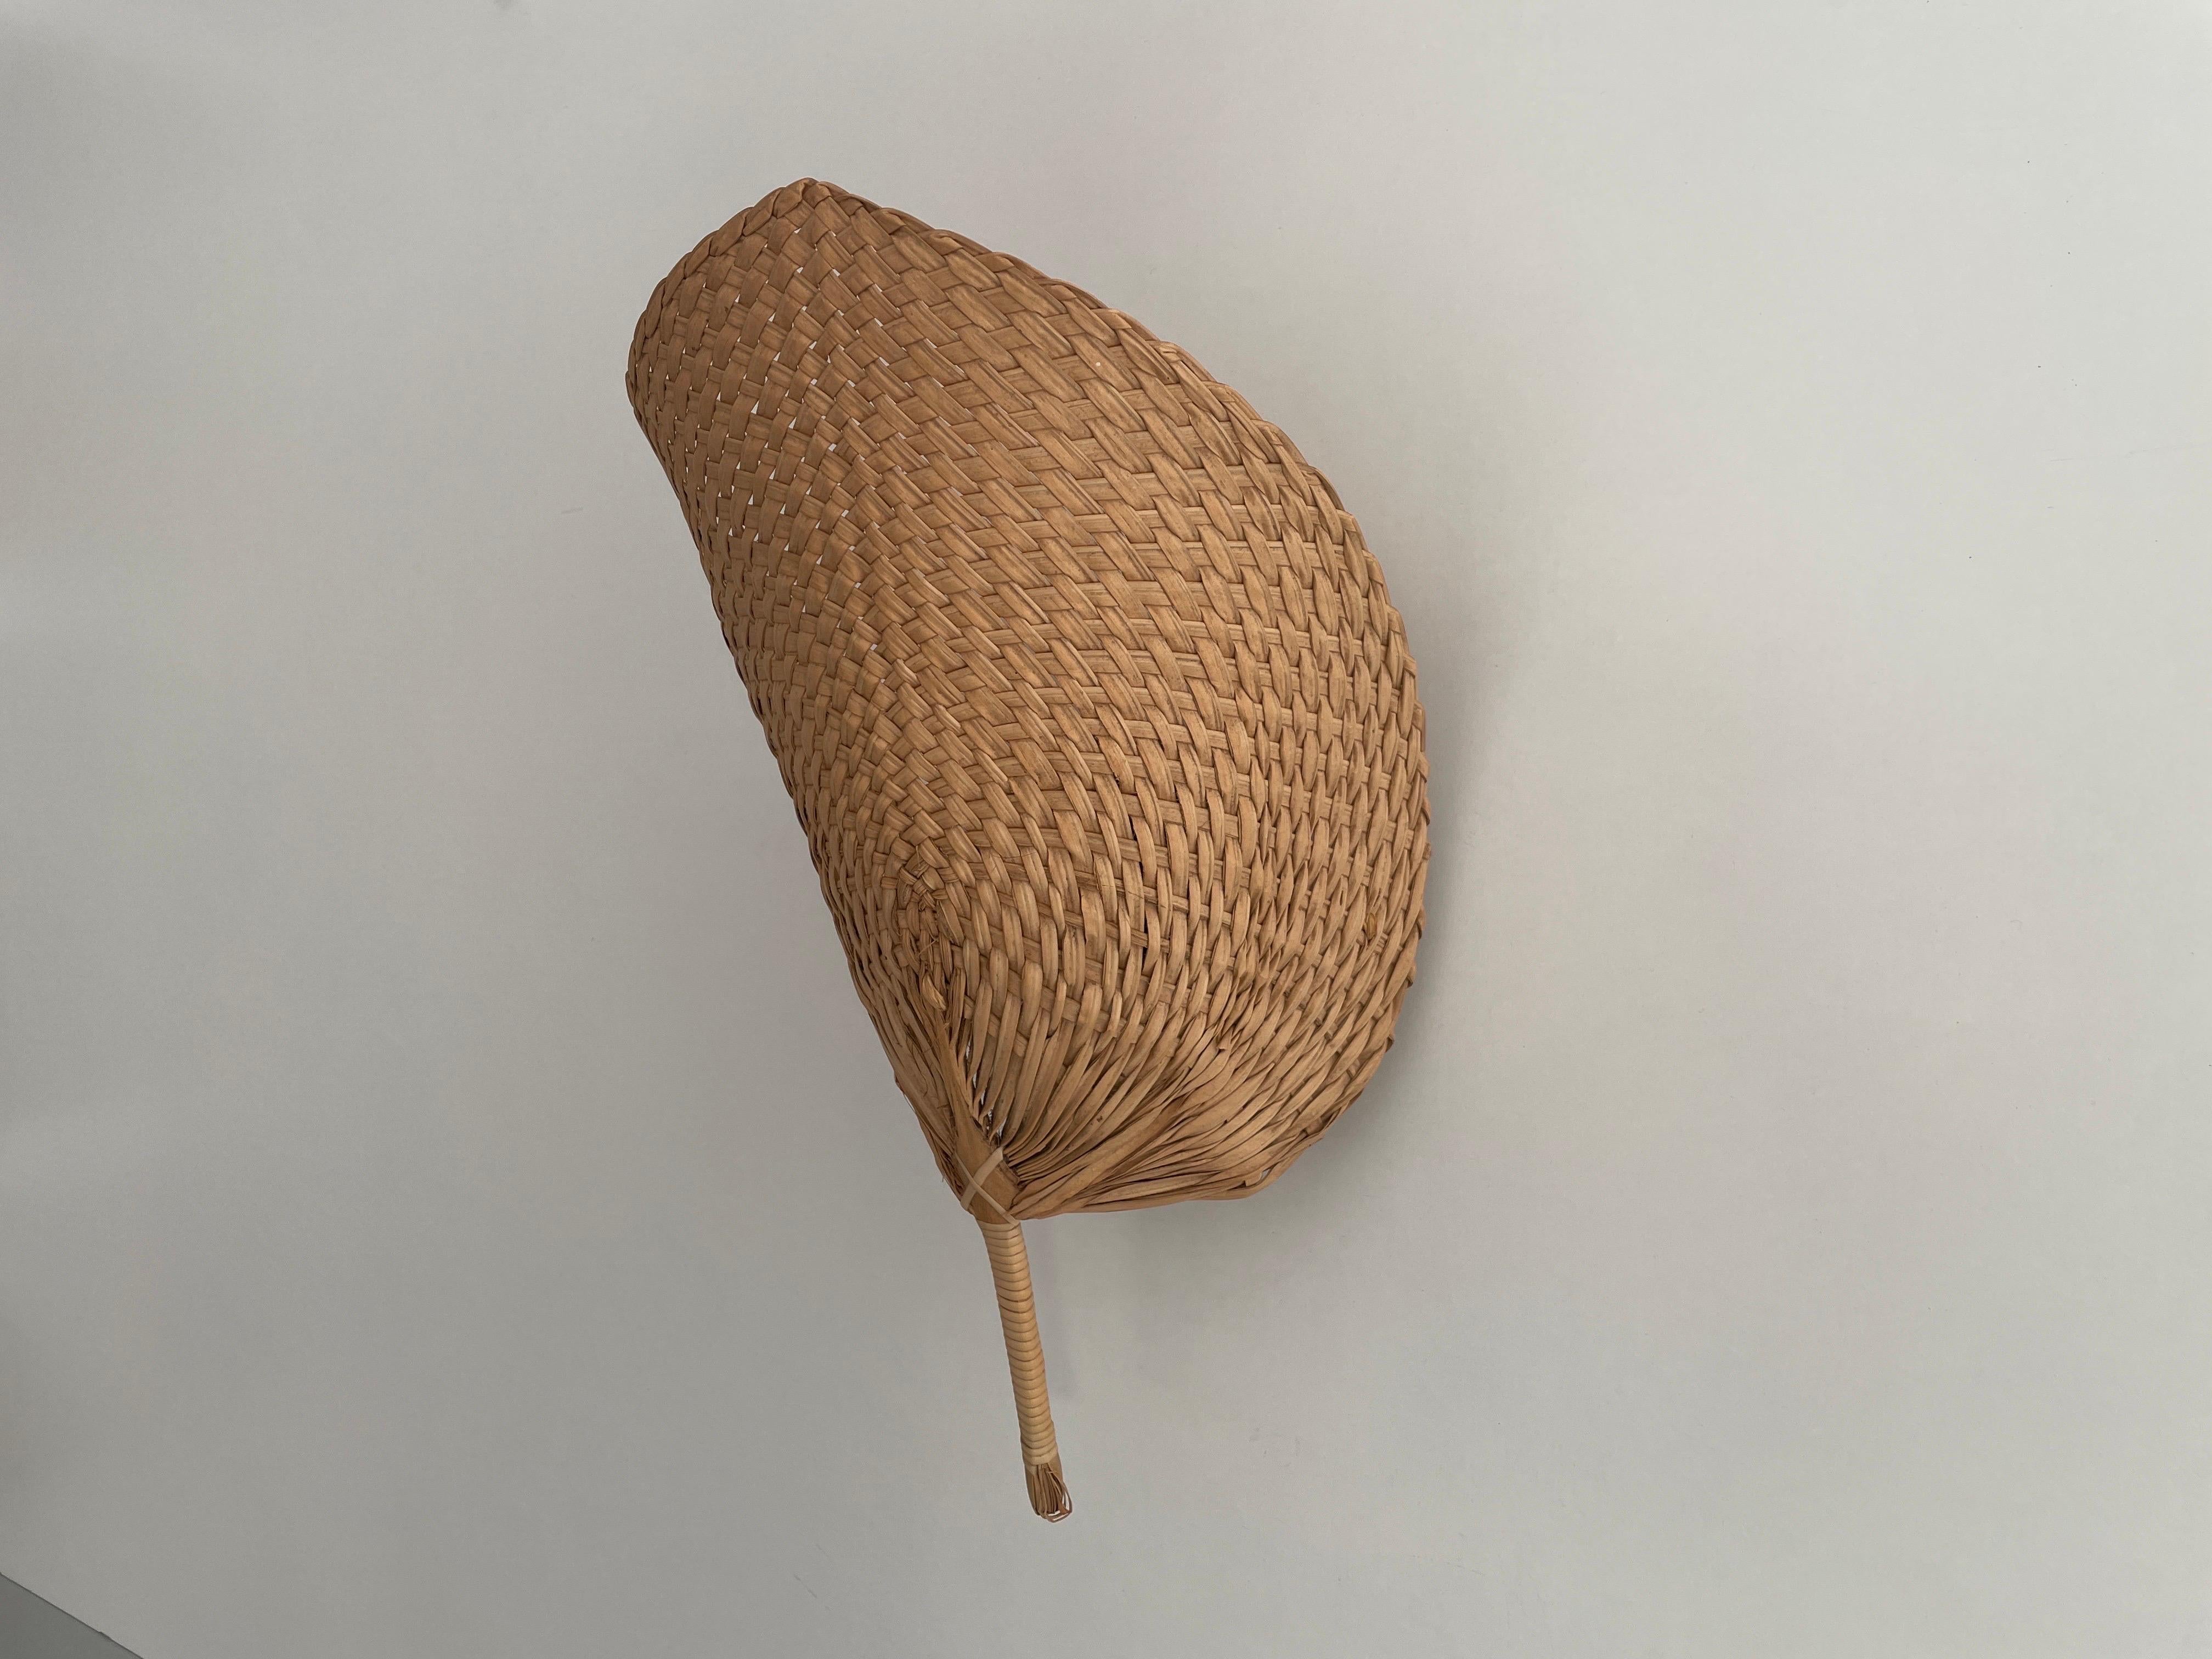 Mid-20th Century Hand-woven Wicker Palmate Leaf Design Single Sconce, 1960s, Germany For Sale